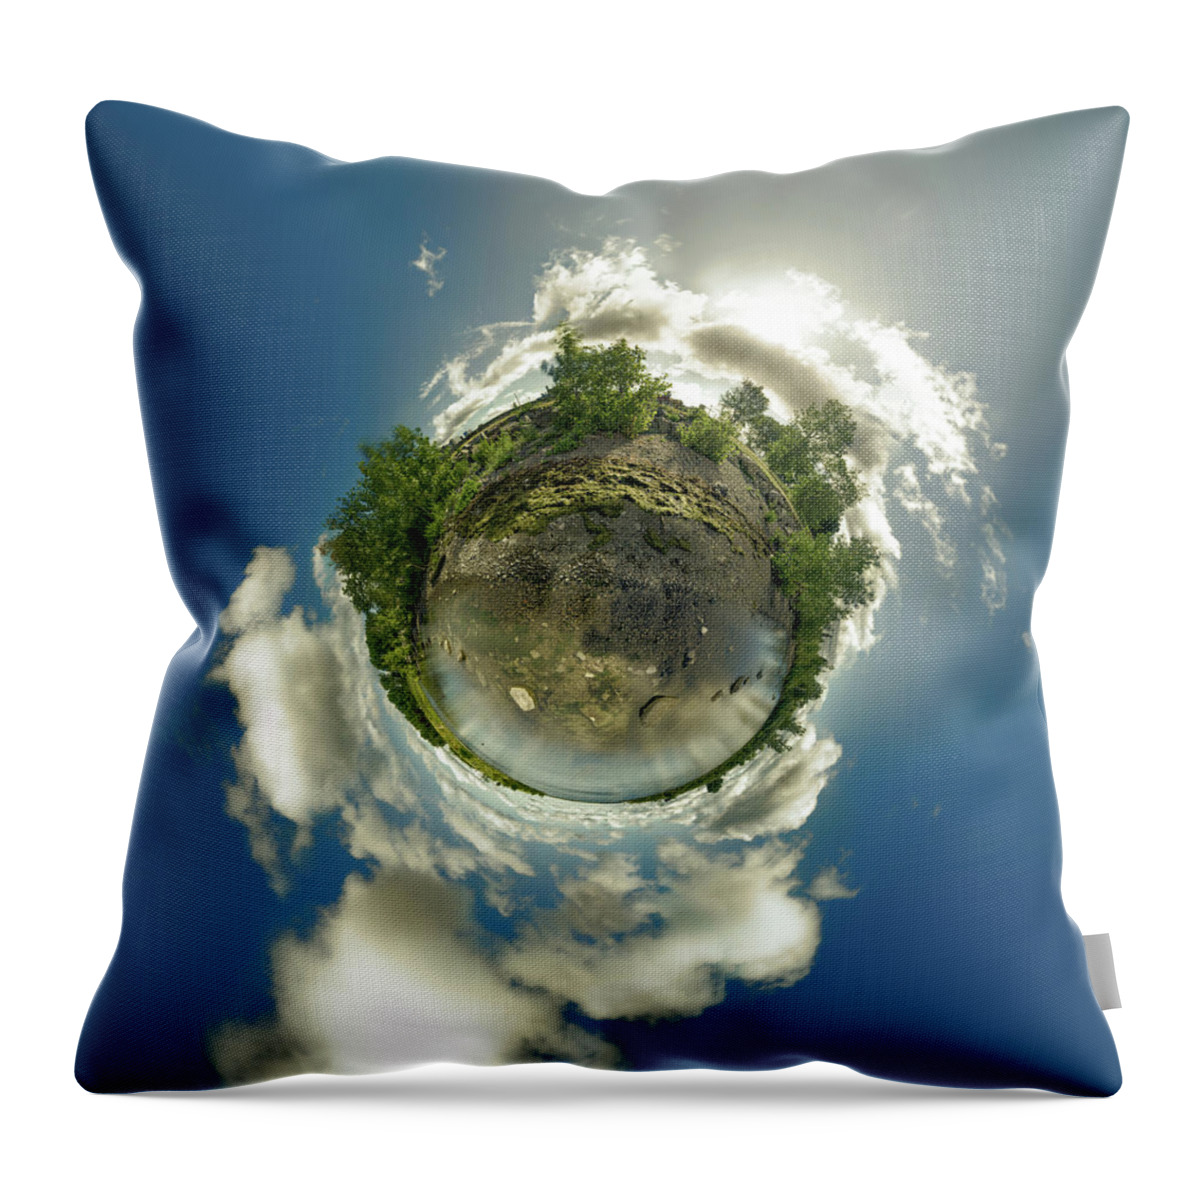 Bell Slip Throw Pillow featuring the photograph Bell Slip Sunrise - Tiny Planet by Chris Bordeleau